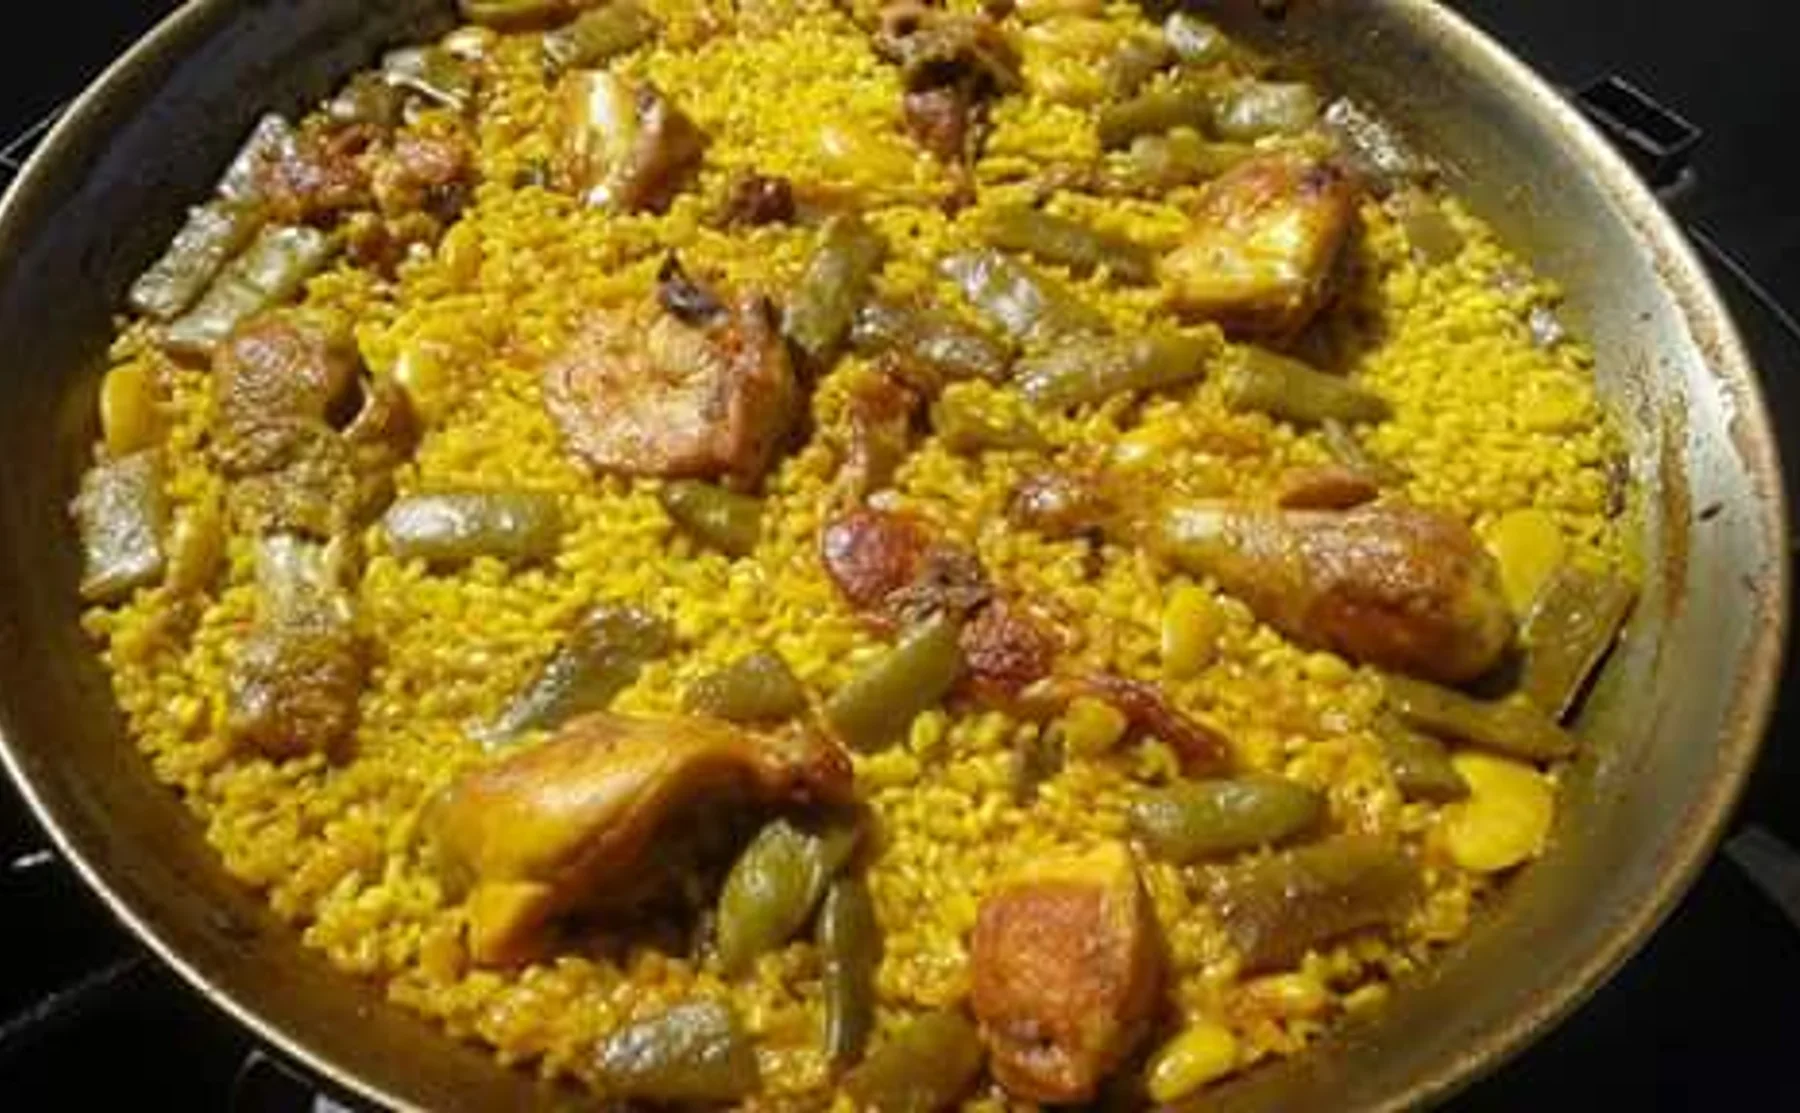 Valencian Paella cooking class and lunch with a Madrid view - 394997